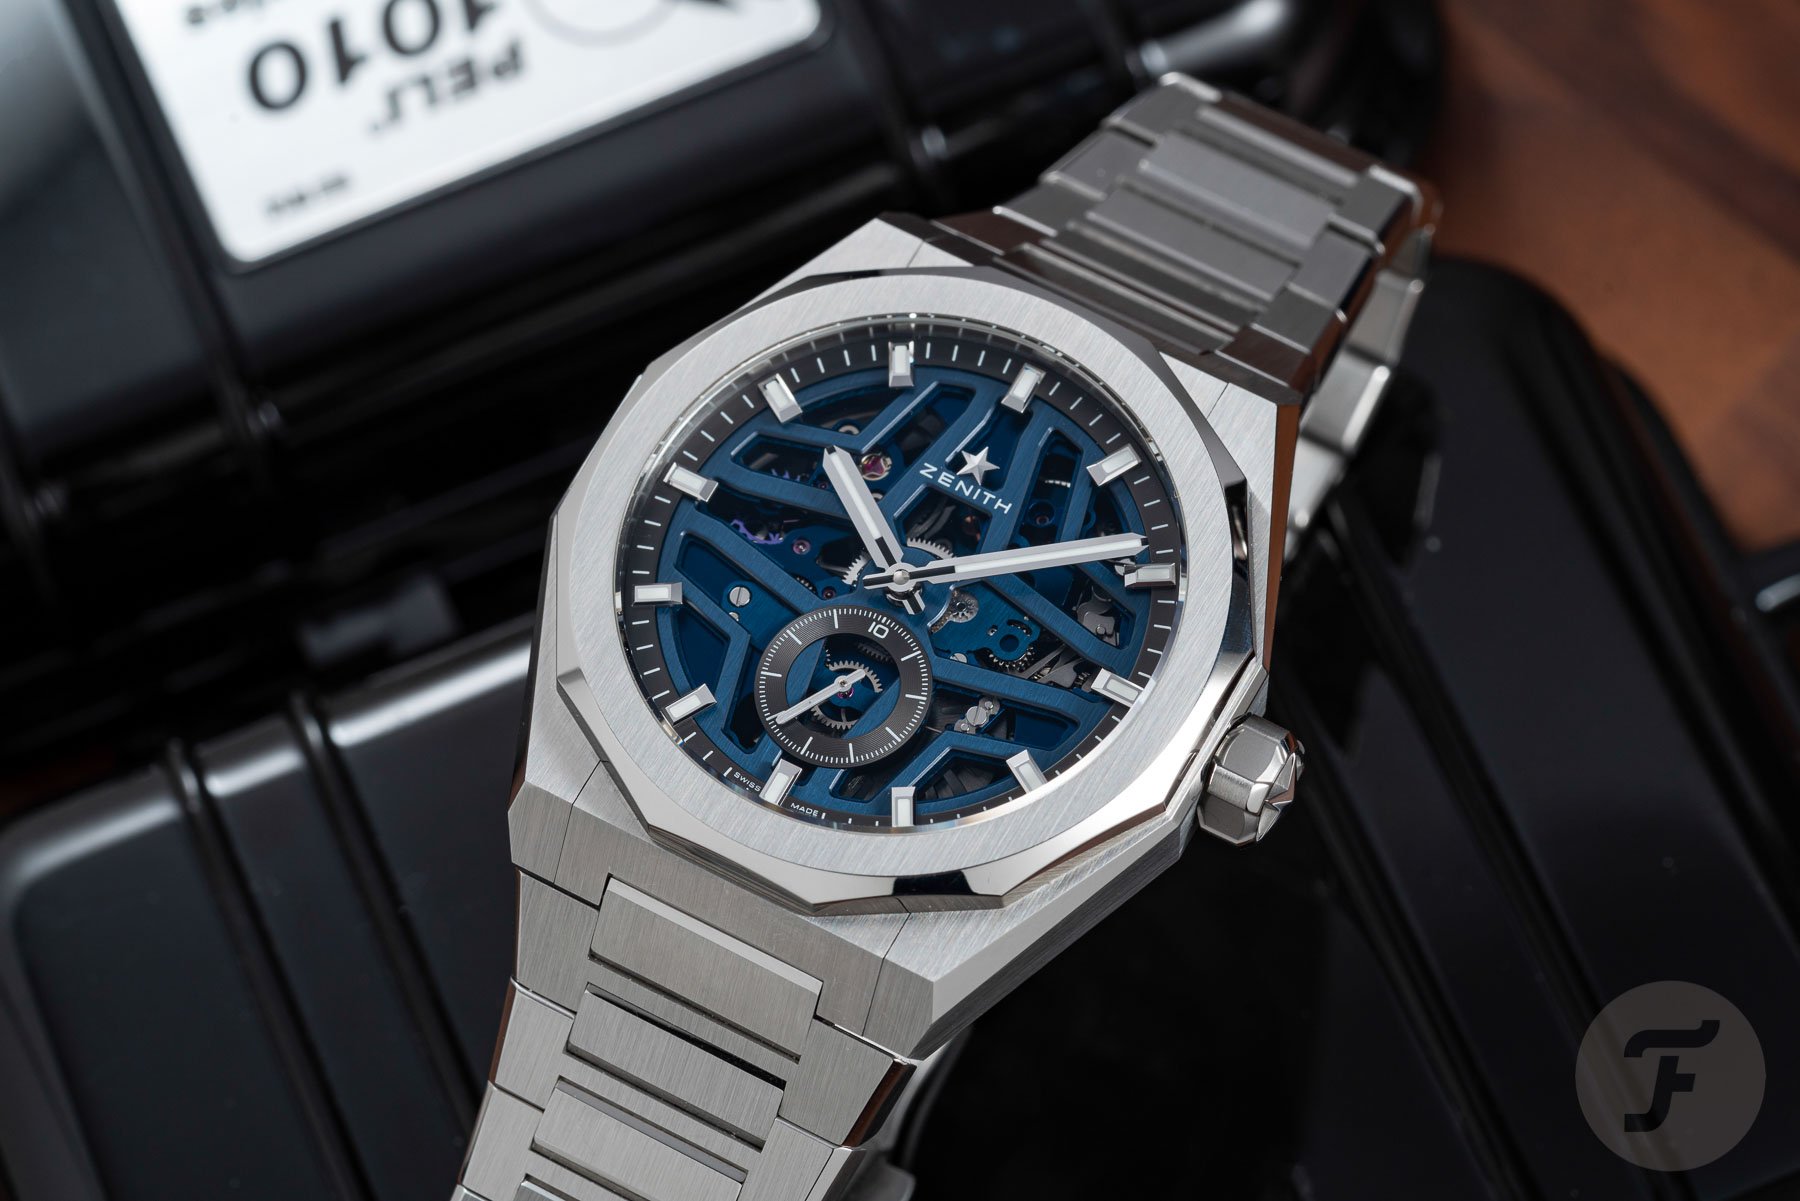 ZENITH Makes Four New Additions to the DEFY Collection at LVMH Watch Week